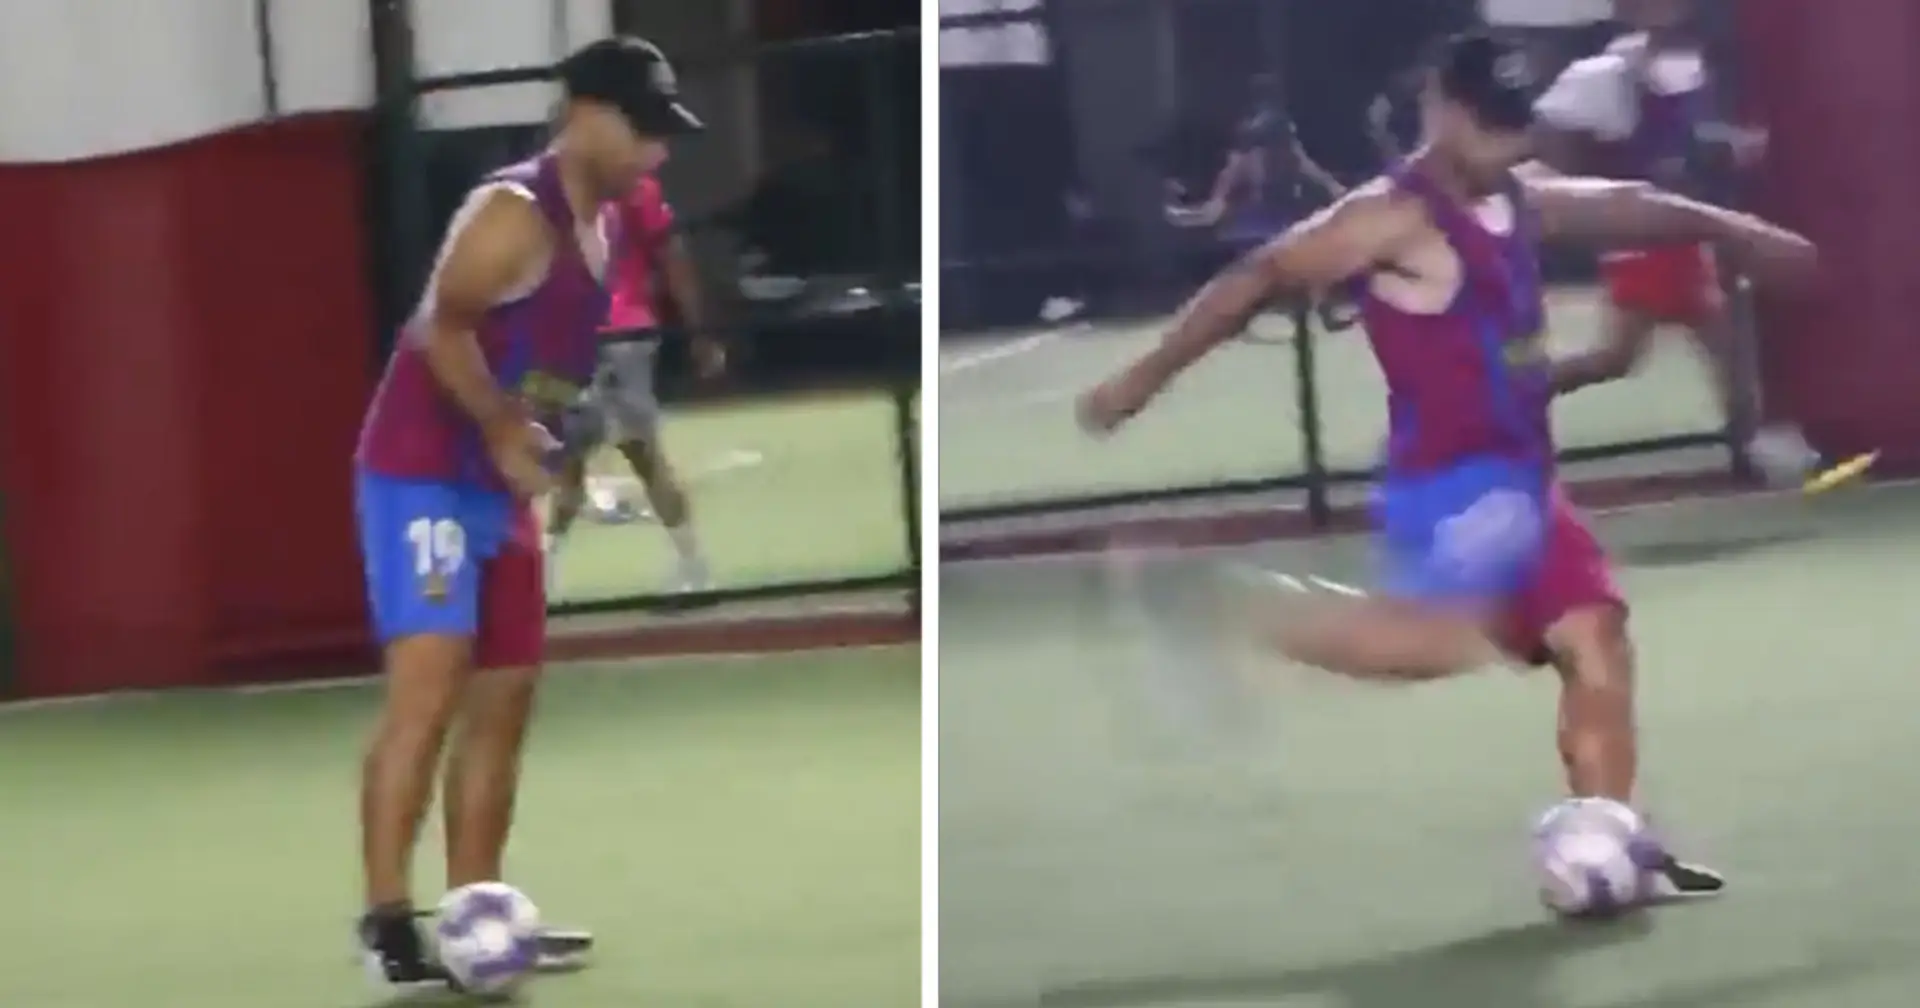 Aguero wears Blaugrana again as he plays football for first time in 7 months